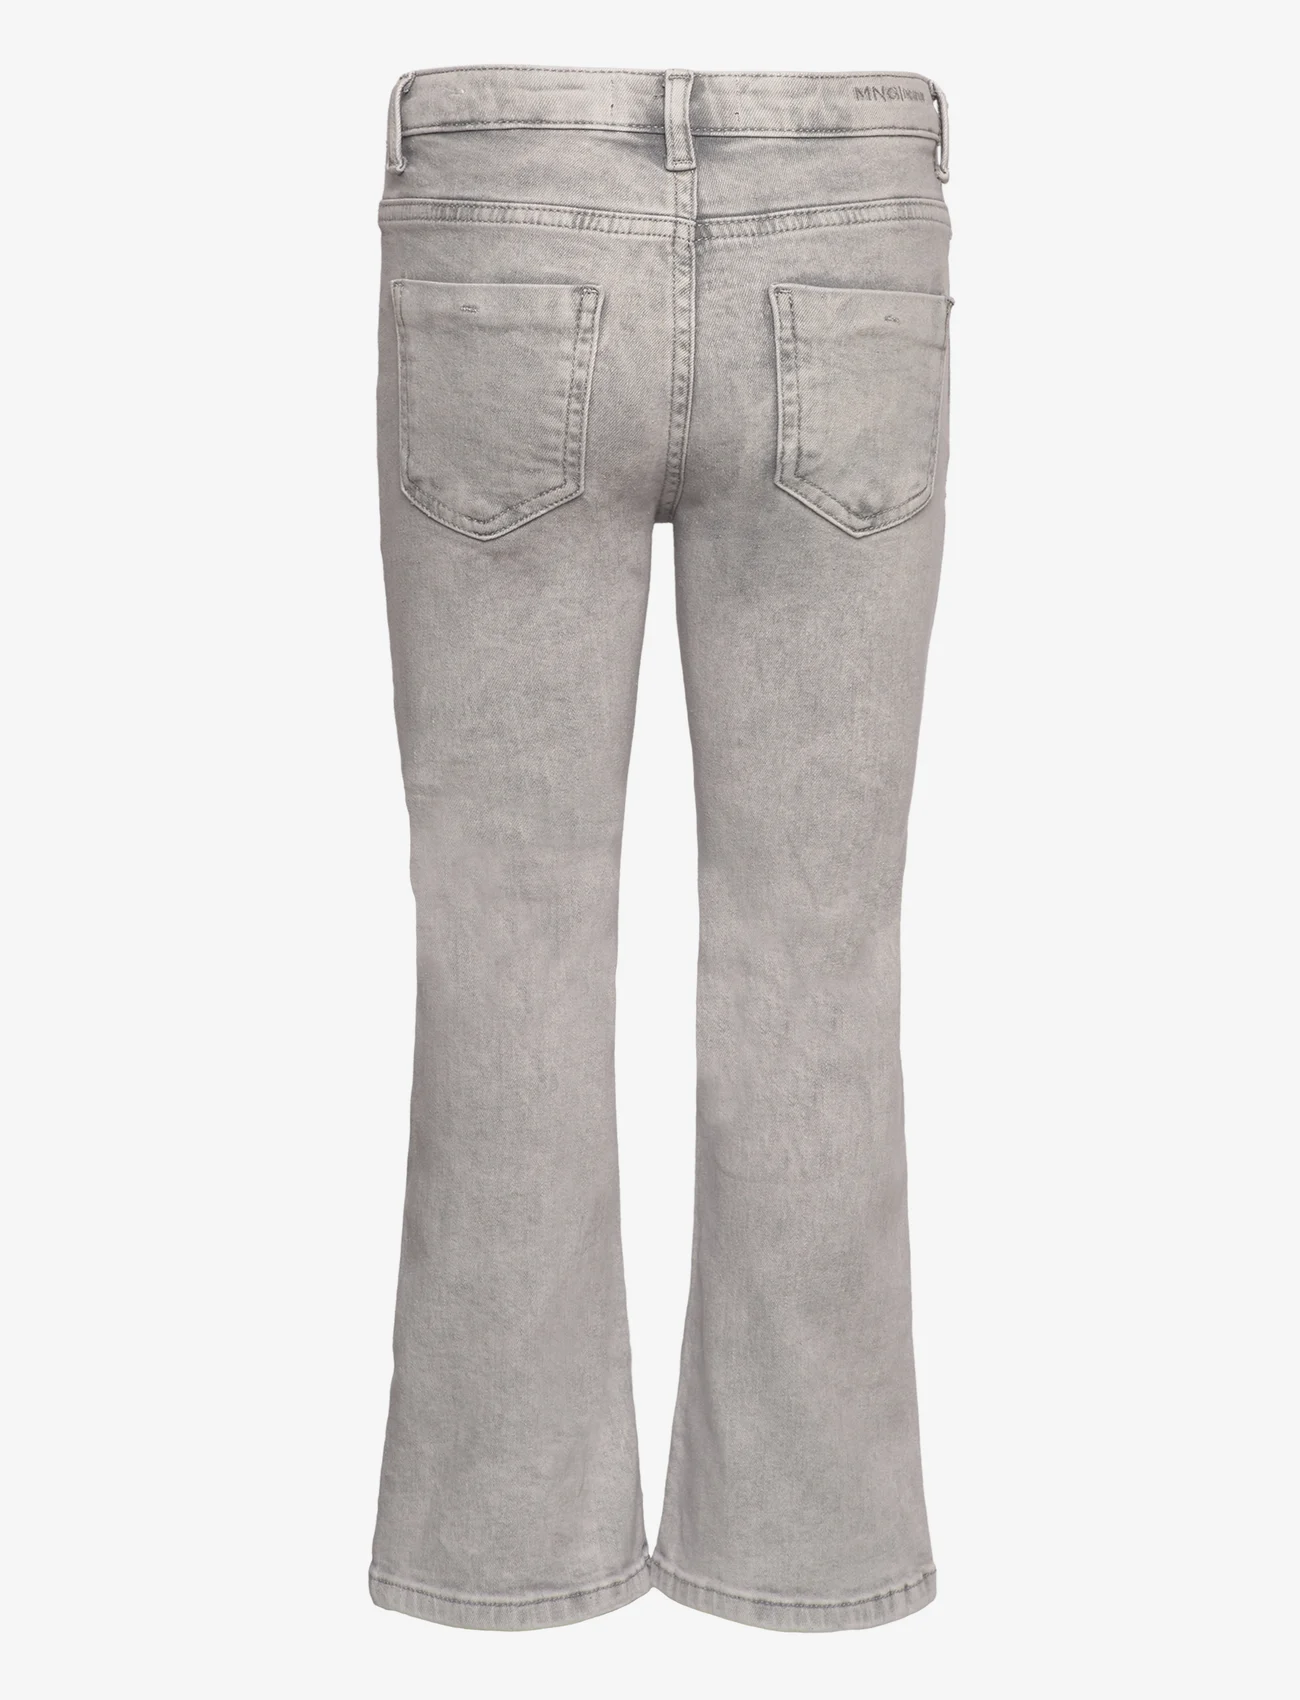 Mango - Flared jeans - bootcut jeans - open grey - 1